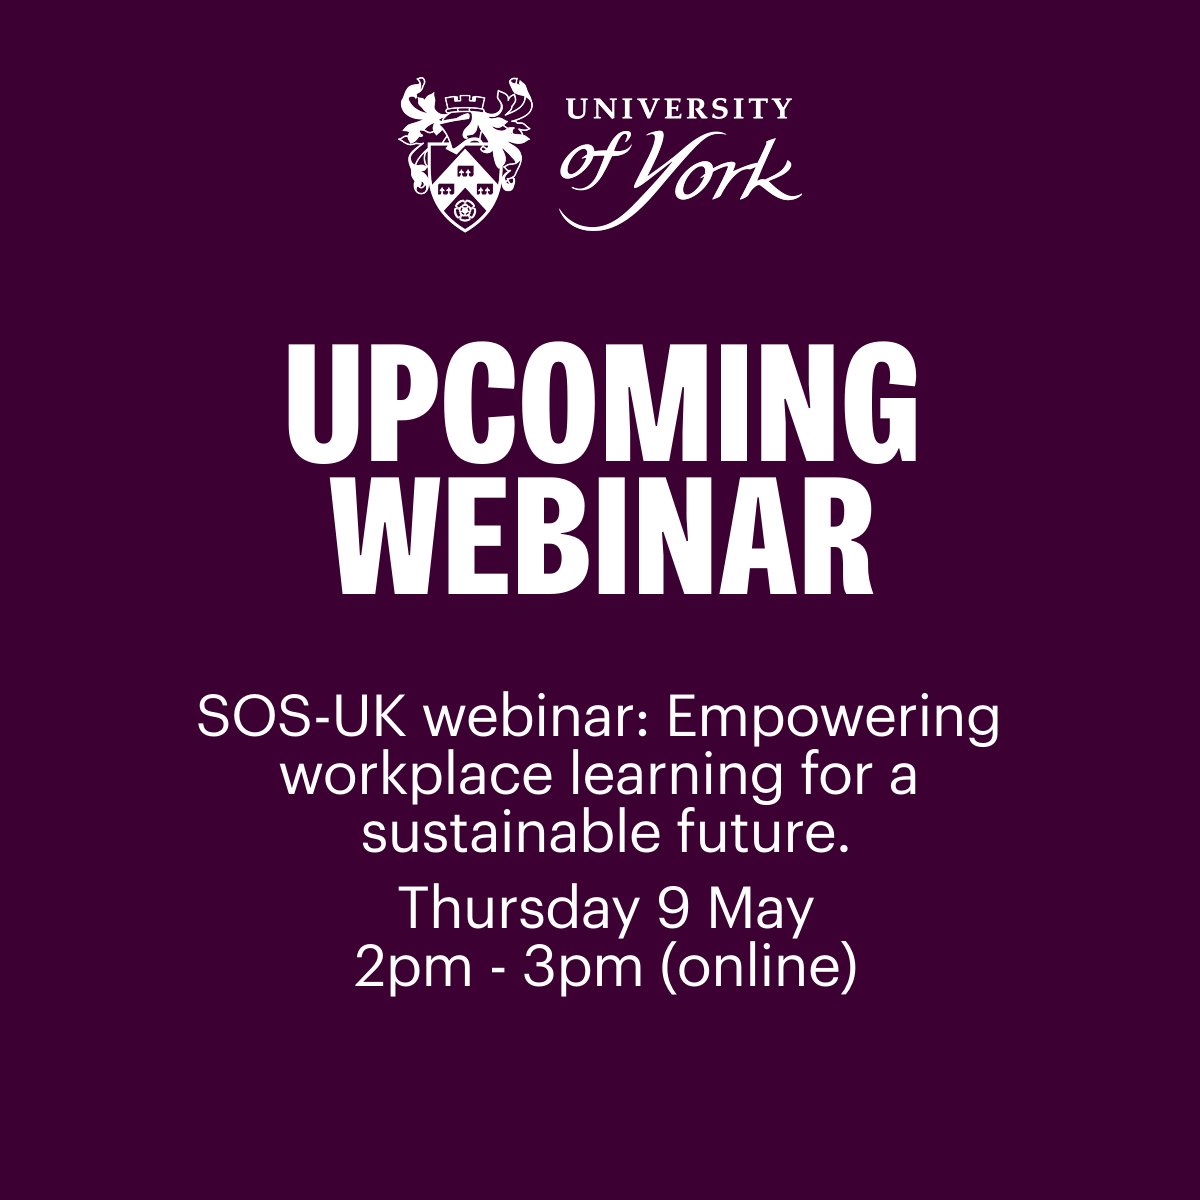 📅 @sosukcharity webinar: Empowering workplace learning for a sustainable future (9 May, 2-3pm, online) 🌿 Learn how we can build sustainability into our personal development opportunities, and make a real impact through learning! ➡️ Sign up: bit.ly/4drGfvb